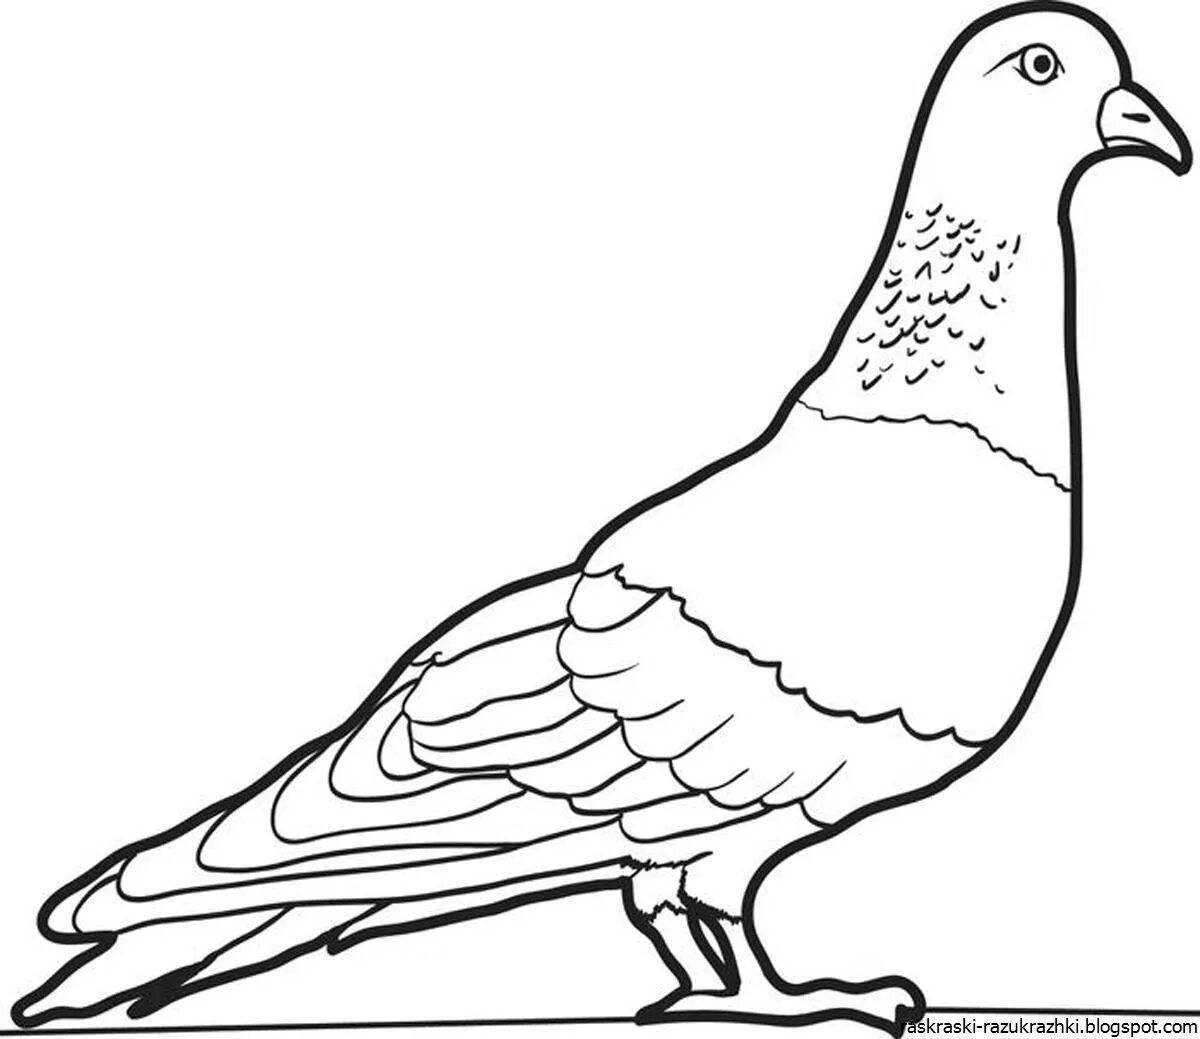 Rampant dove coloring page